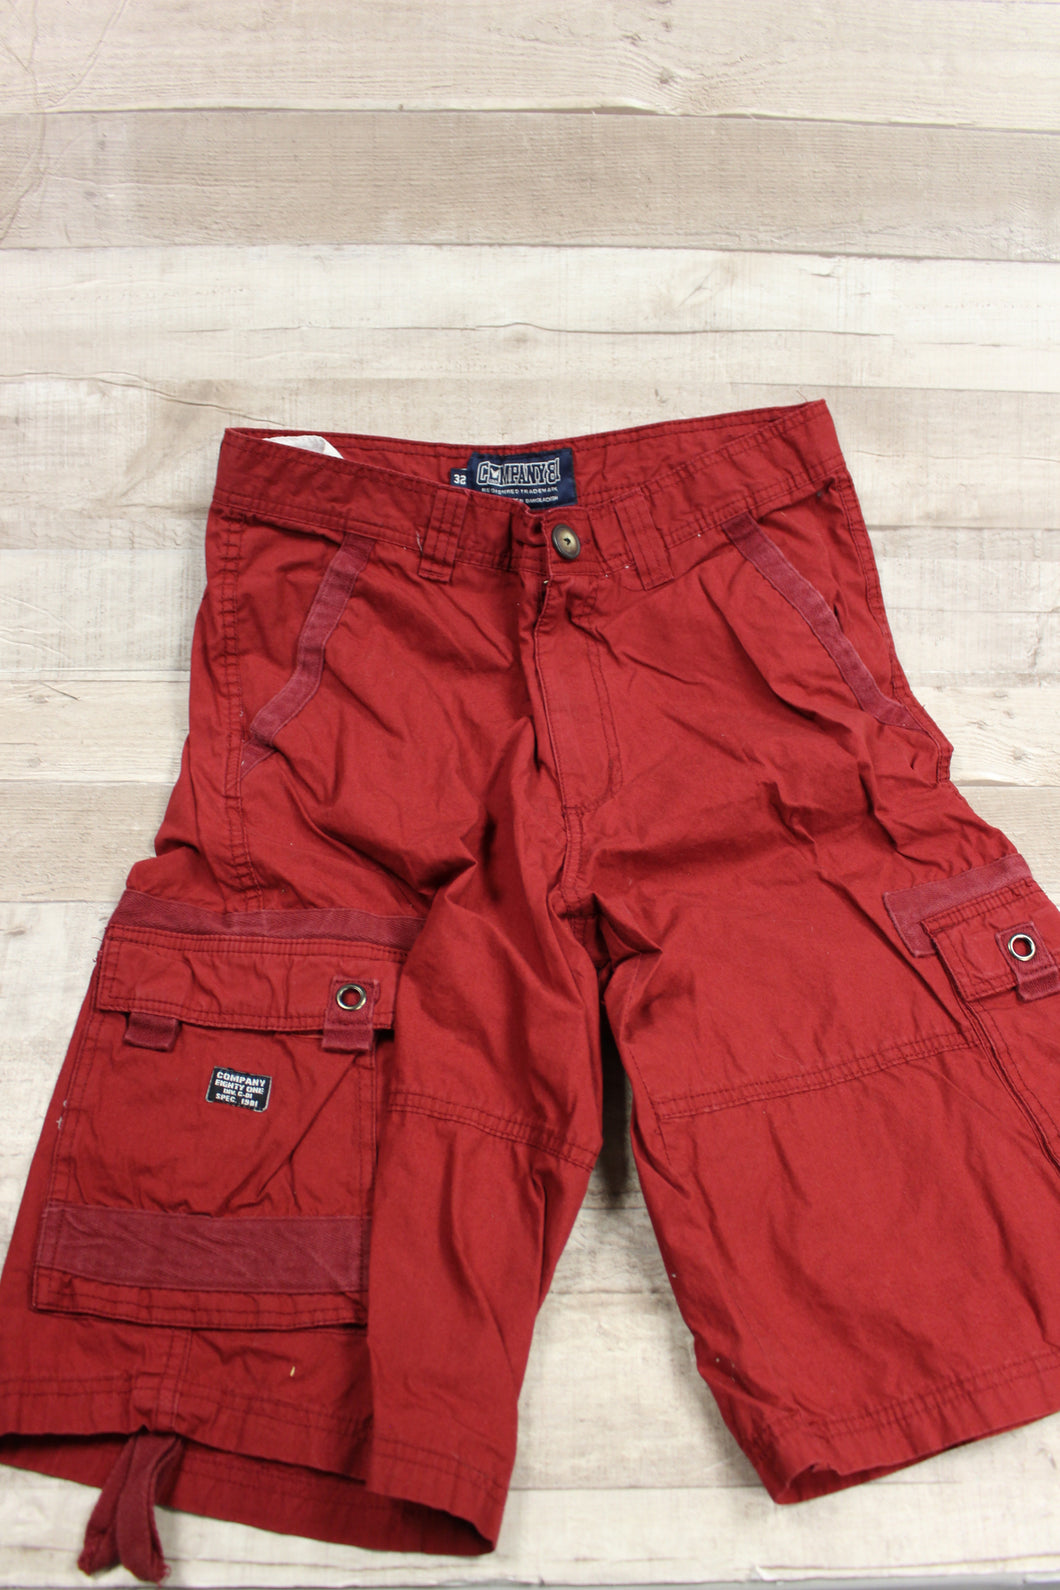 Company 81 Men's Cargo Short Size 32 -Red -Used